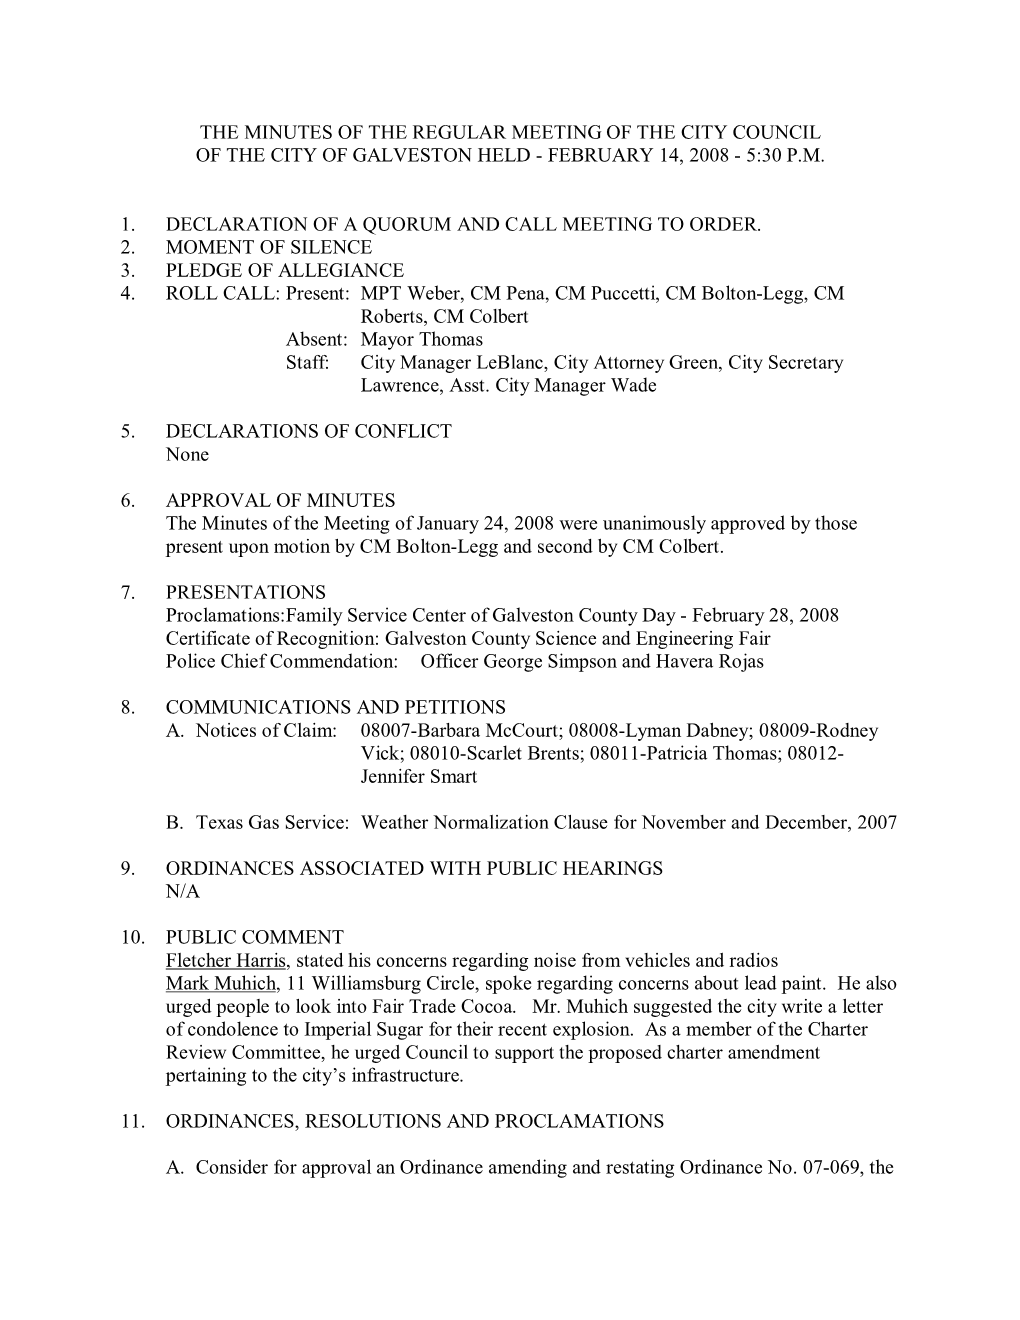 The Minutes of the Regular Meeting of the City Council of the City of Galveston Held - February 14, 2008 - 5:30 P.M